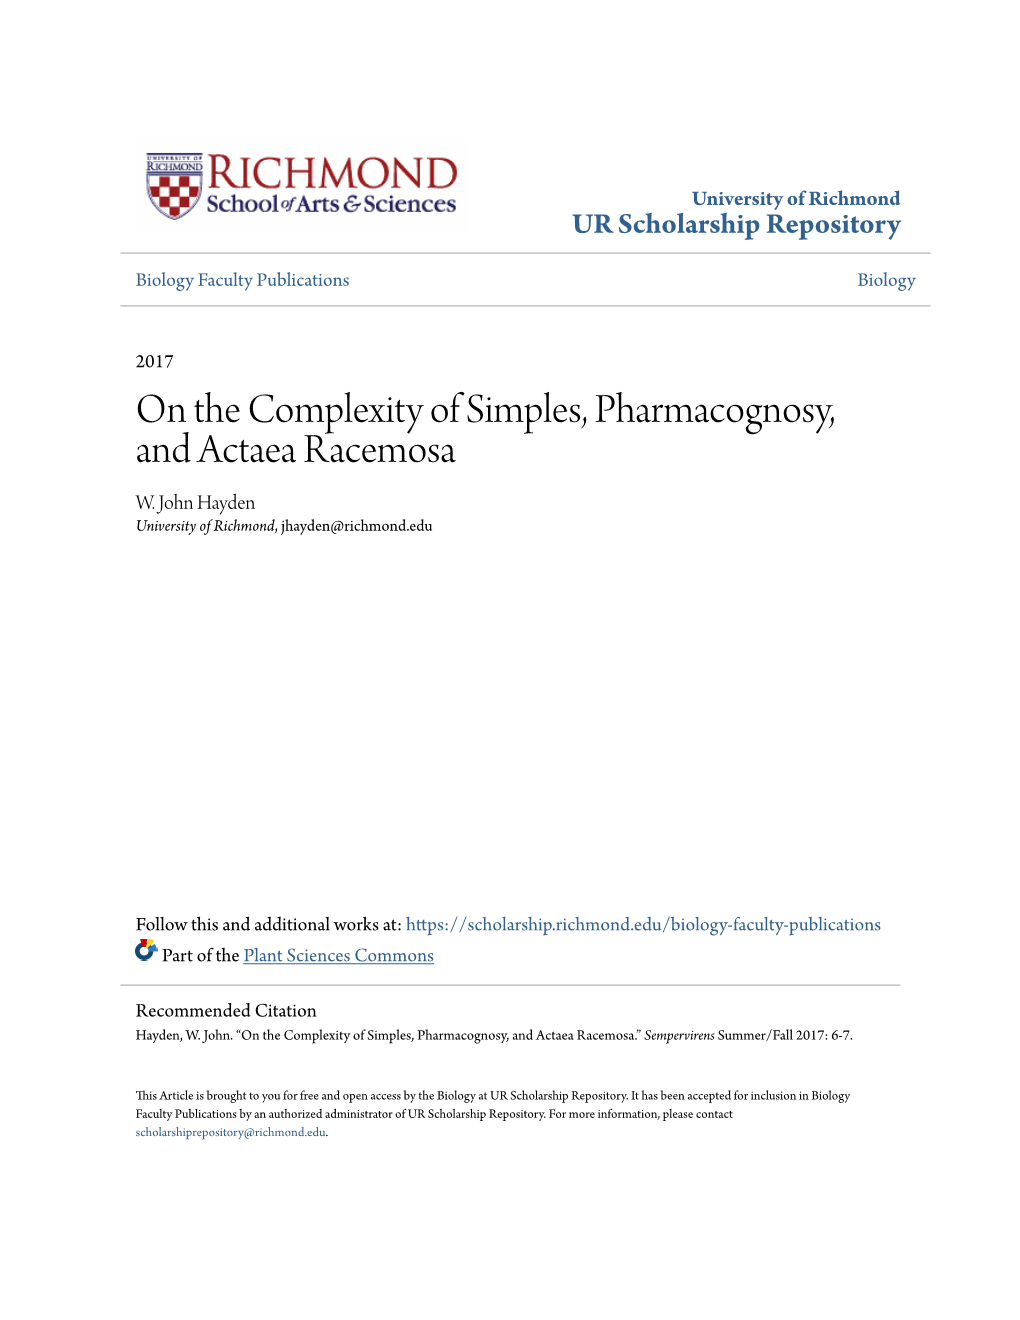 On the Complexity of Simples, Pharmacognosy, and Actaea Racemosa W